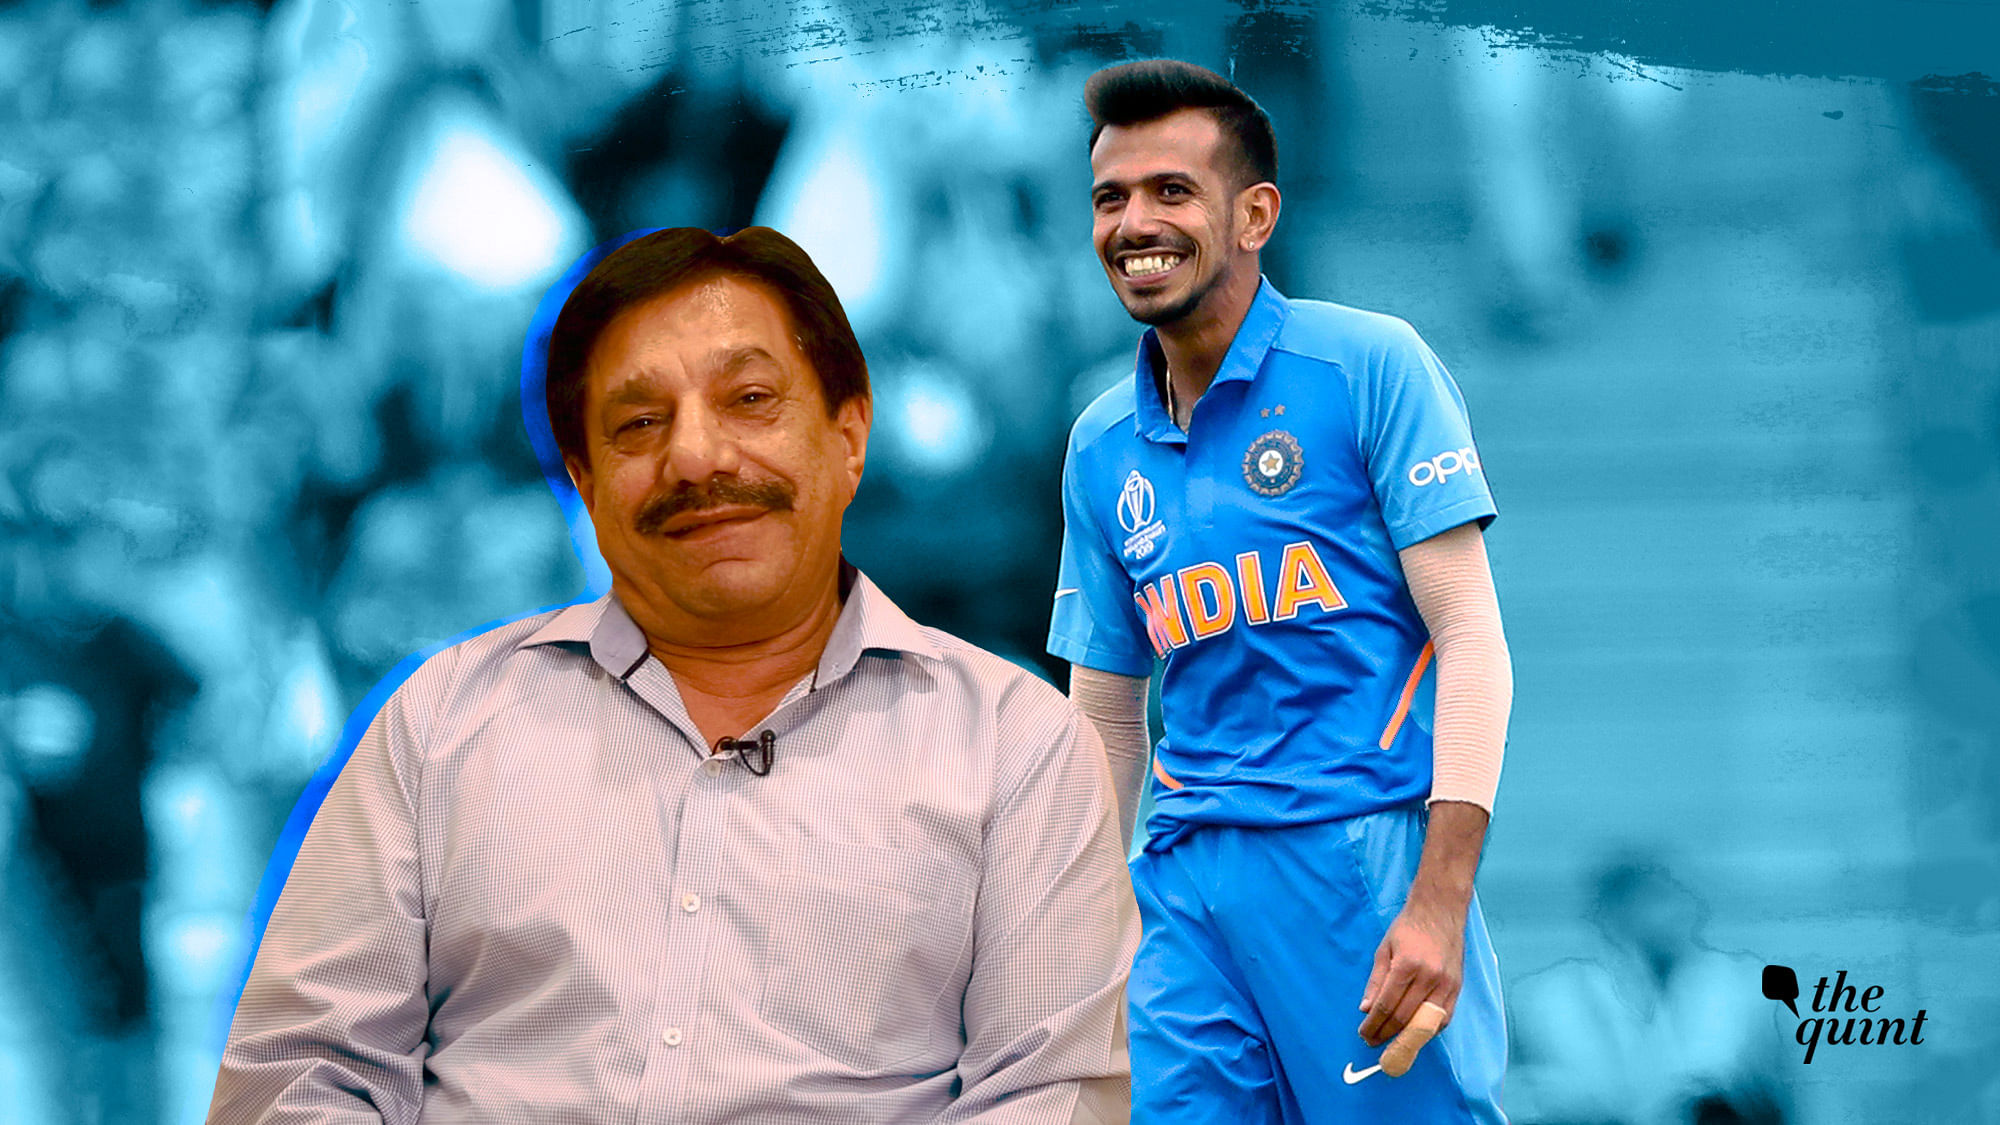 The Quint spoke to the proud father of Yuzvendra Chahal just before India kicked off their ICC World Cup campaign.